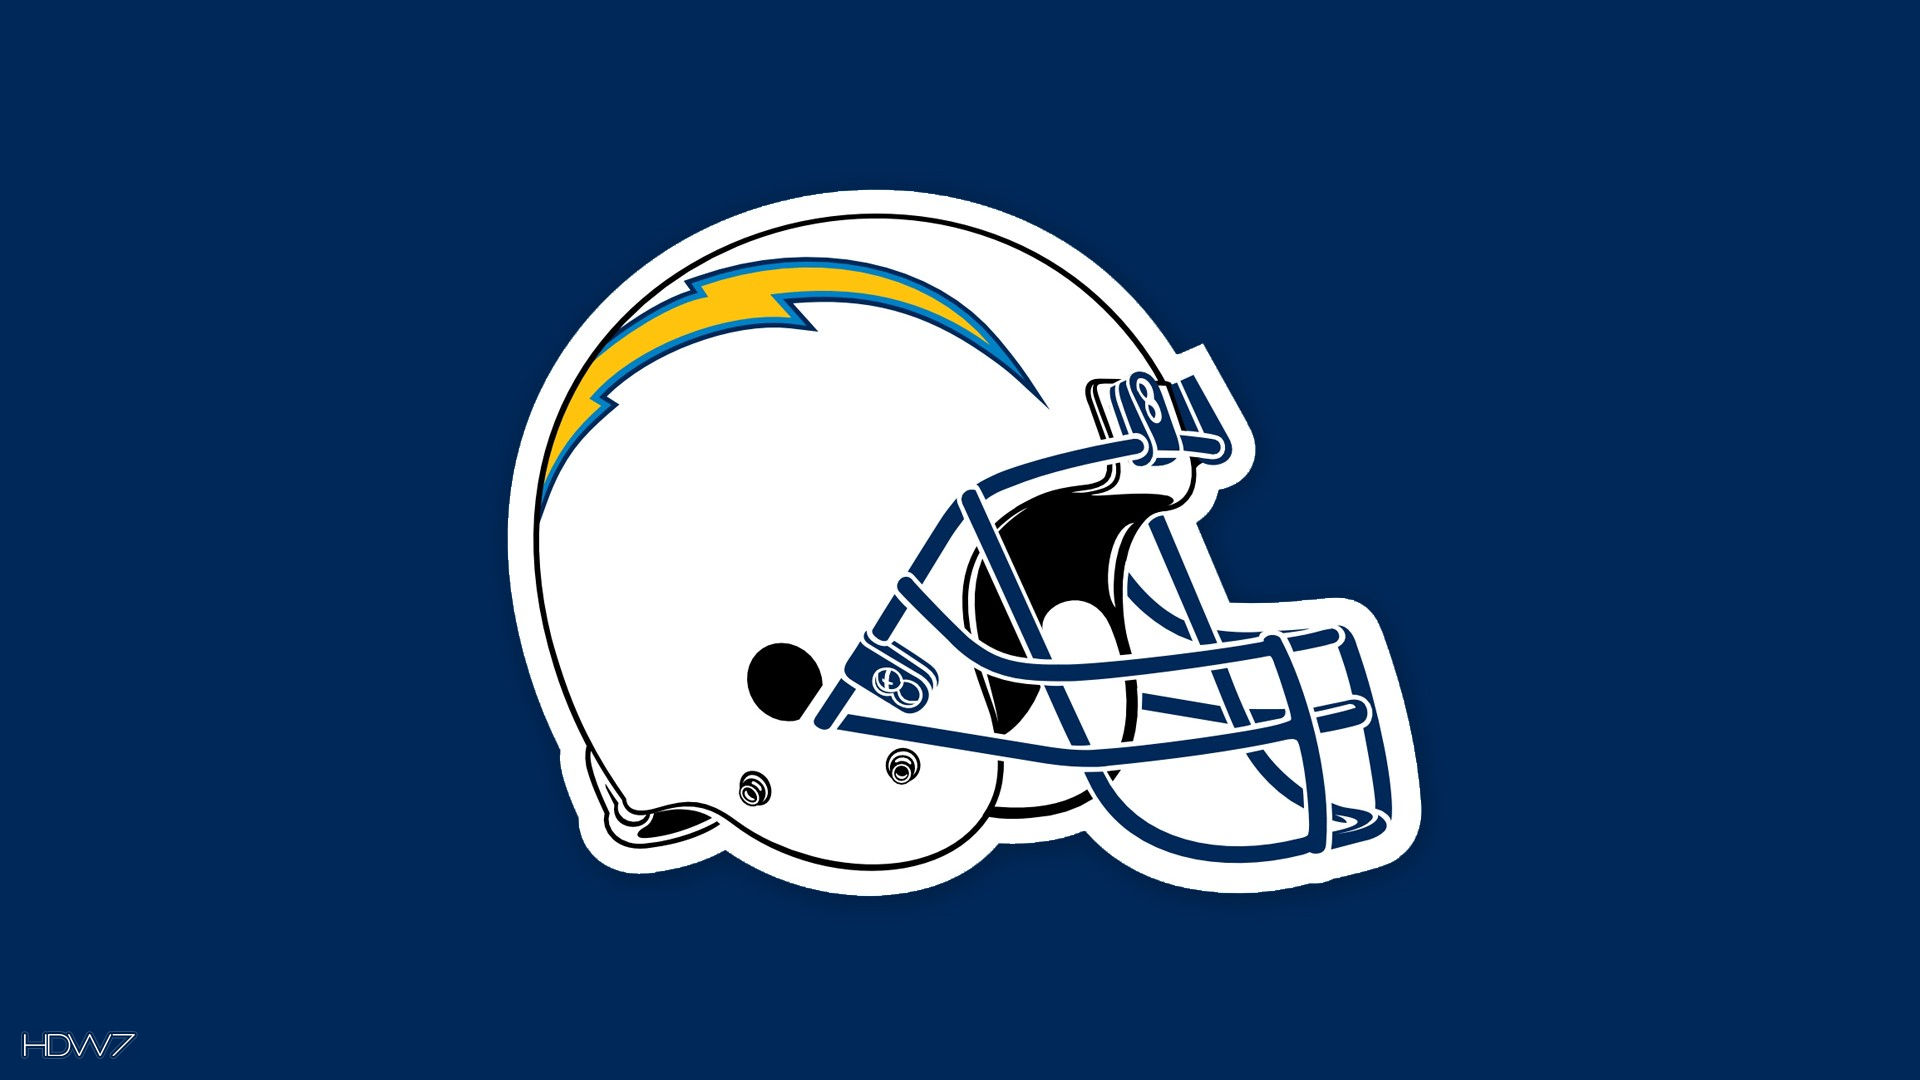 Wallpaper Name San Diego Chargers Logo Jpg Added May